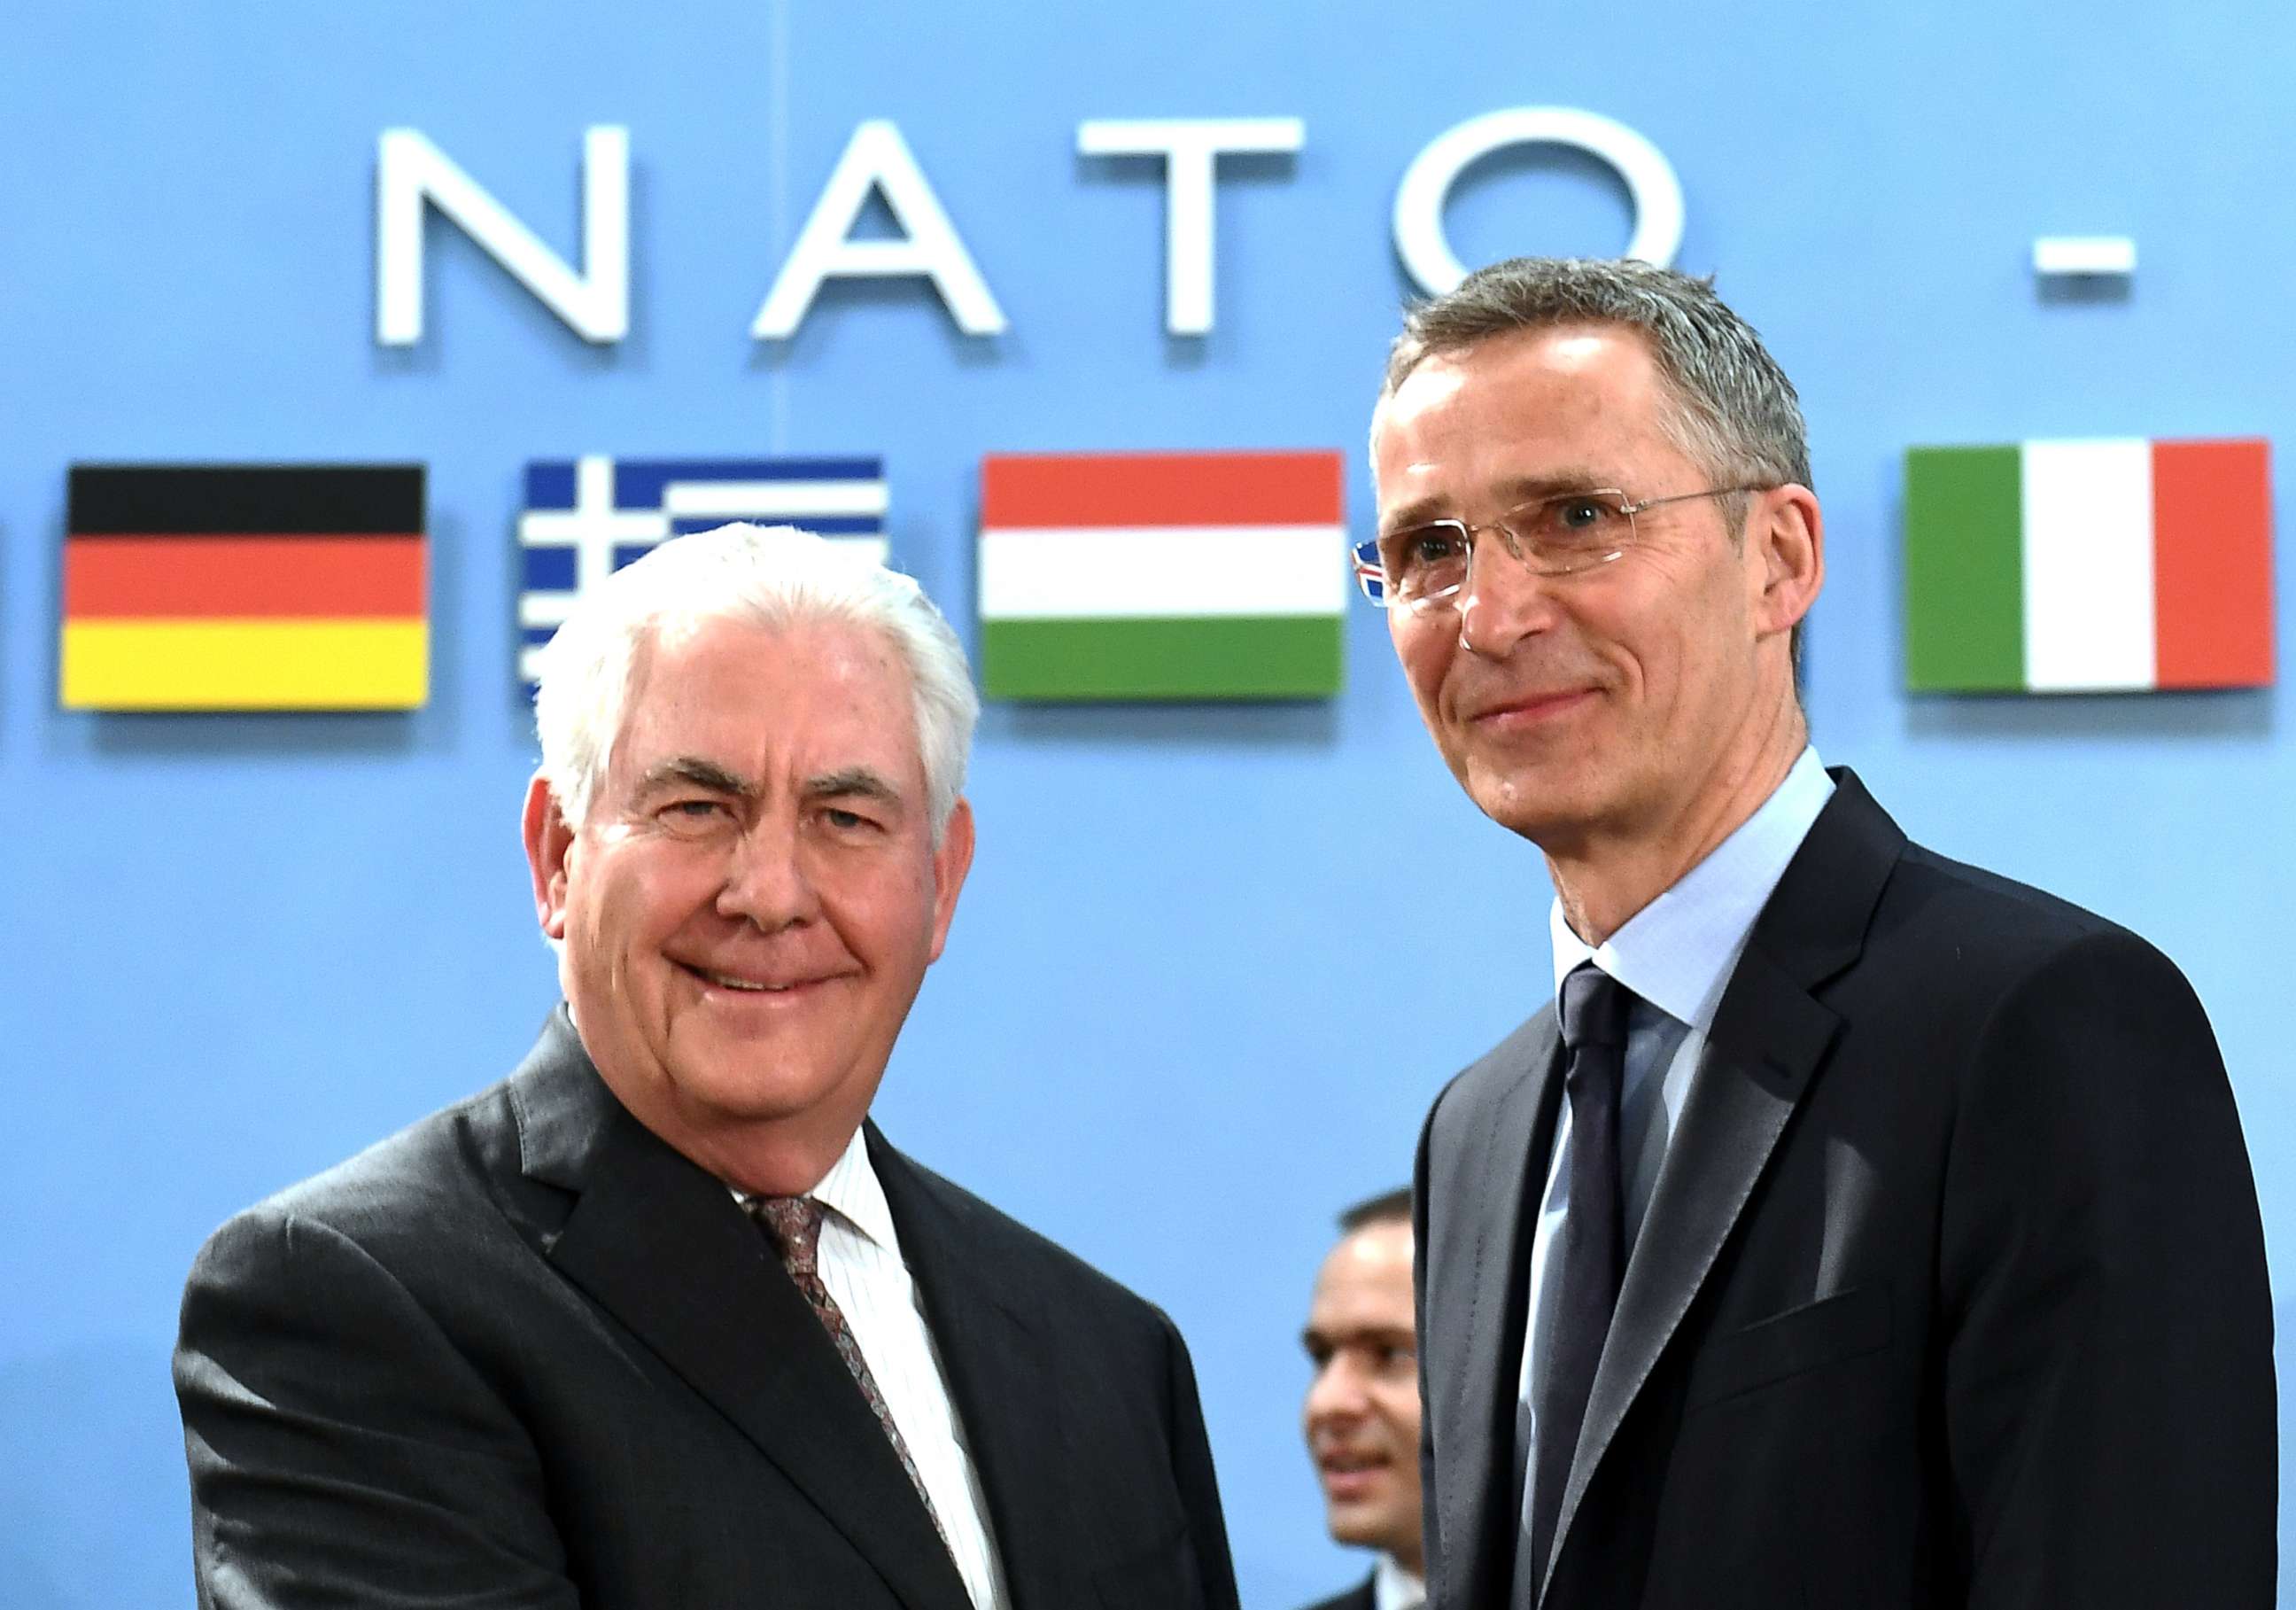 PHOTO: NATO Secretary General Jens Stoltenberg (R) greets U.S. Secretary of State Rex Tillerson upon his arrival for a North Atlantic Council (NAC) meeting at the level of Foreign Ministers, at NATO headquarters in Brussels on March 31, 2017. 